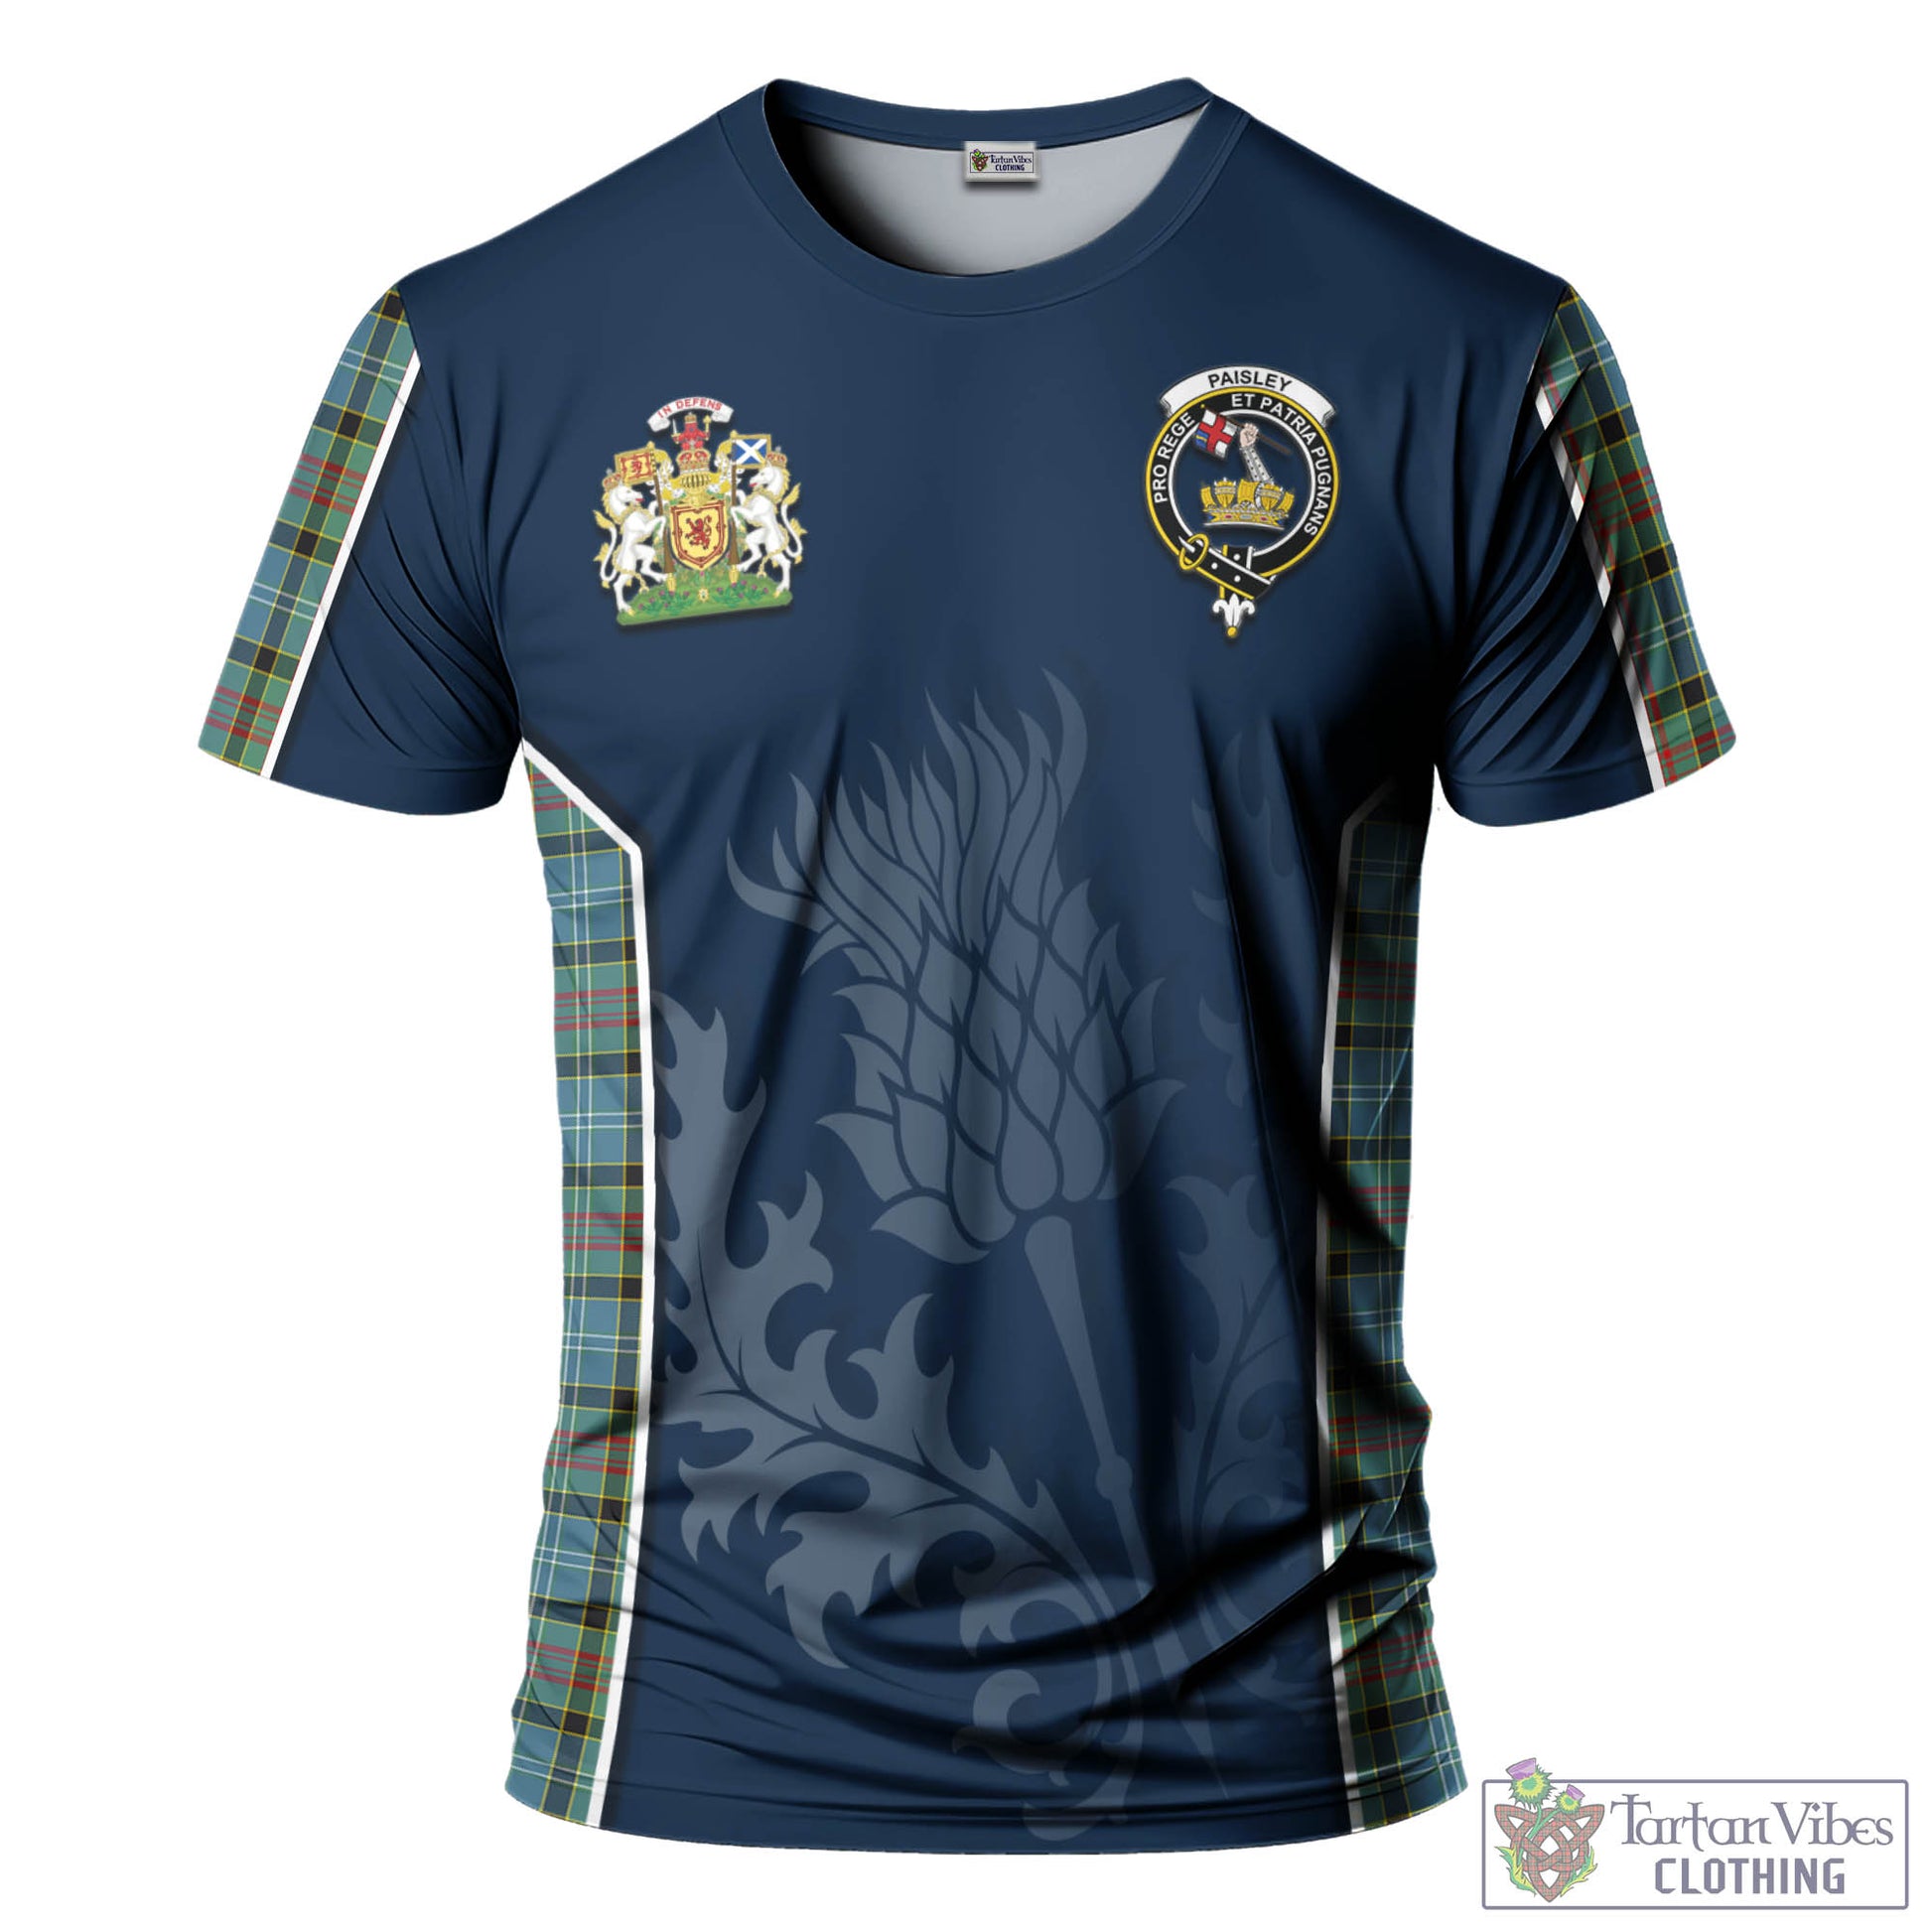 Tartan Vibes Clothing Paisley Tartan T-Shirt with Family Crest and Scottish Thistle Vibes Sport Style